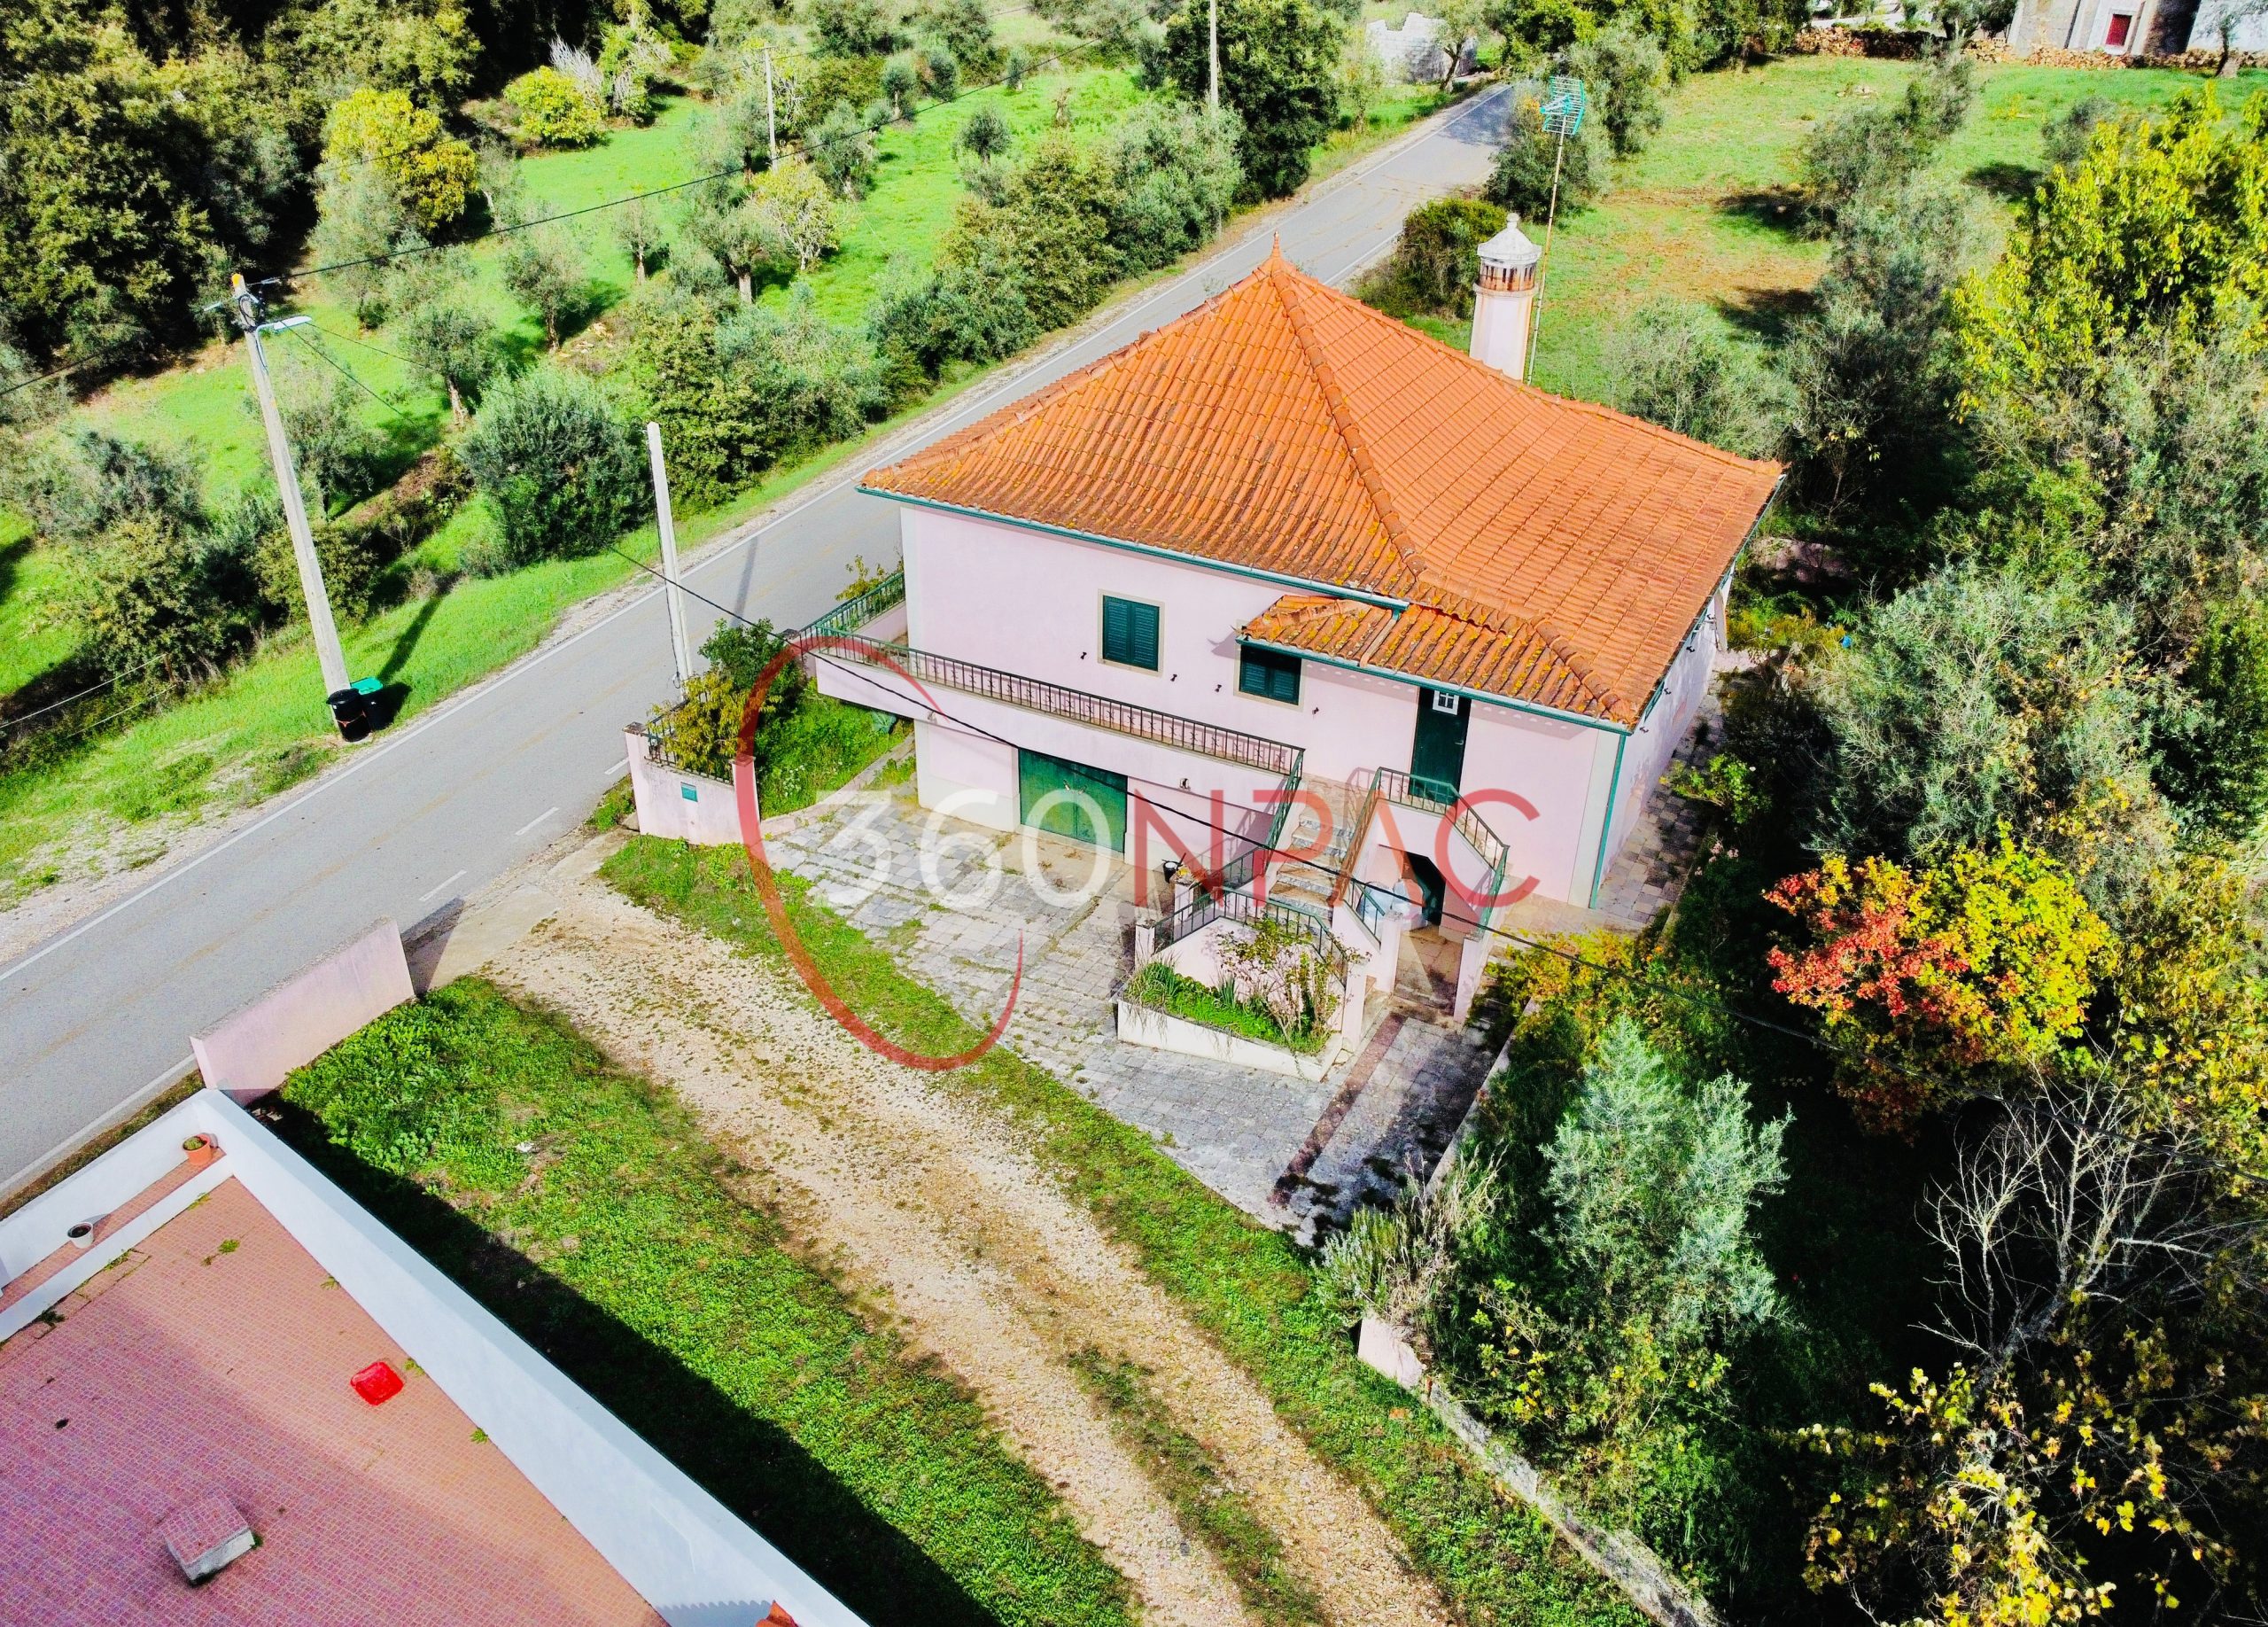 3-bedroom villa with land 10 minutes from Tomar